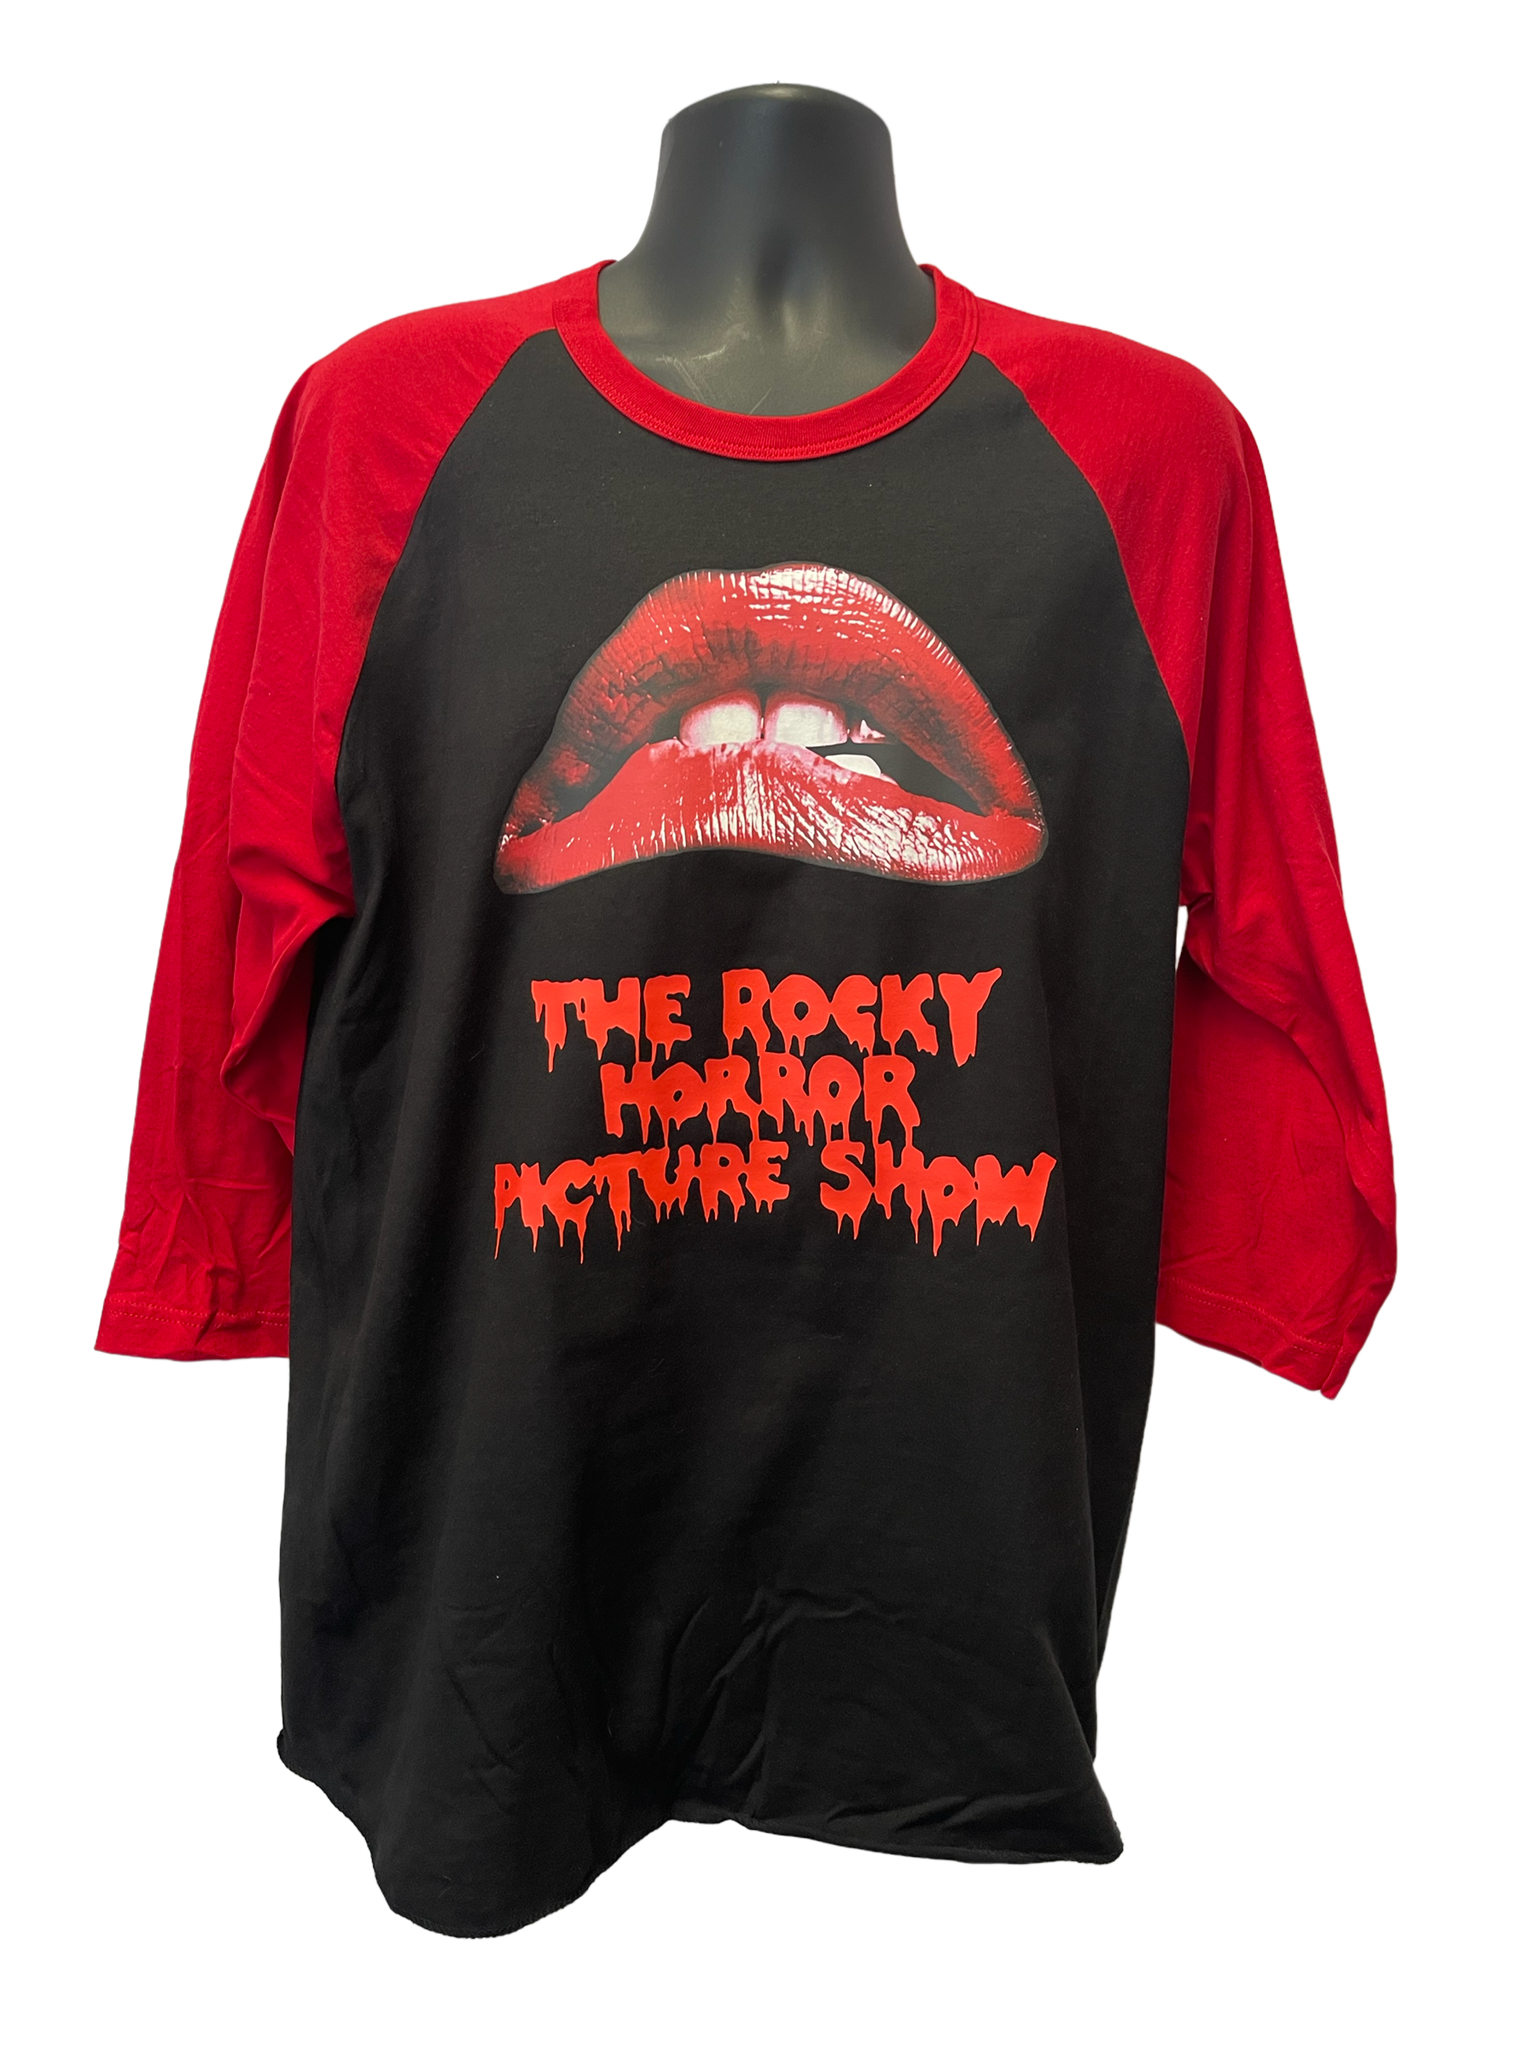 ROCKY HORROR PICTURE SHOW RED / BLACK RAGLAN